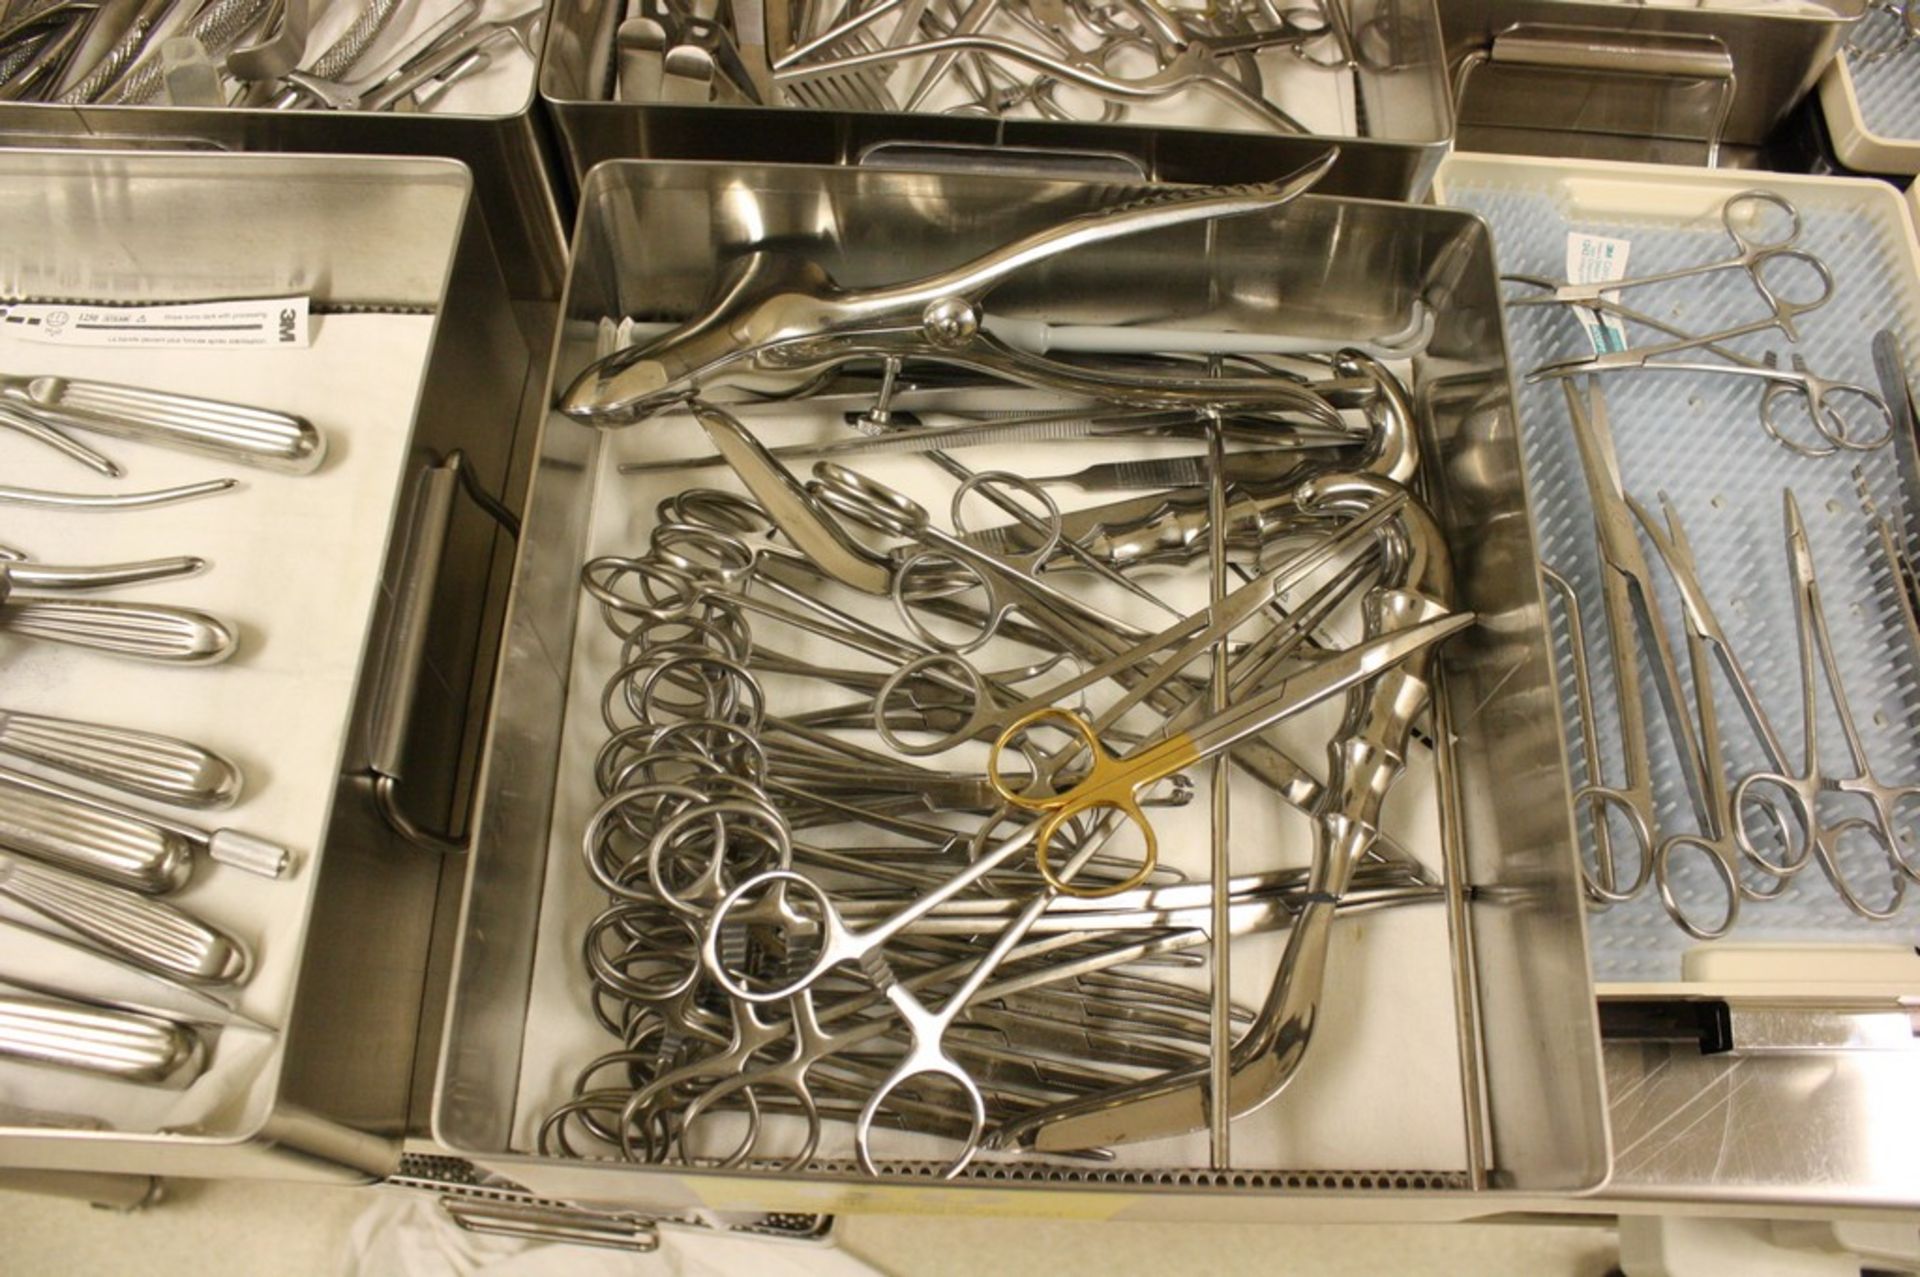 SURGICAL FORCEPS, ETC IN STERILIZATION TRAY